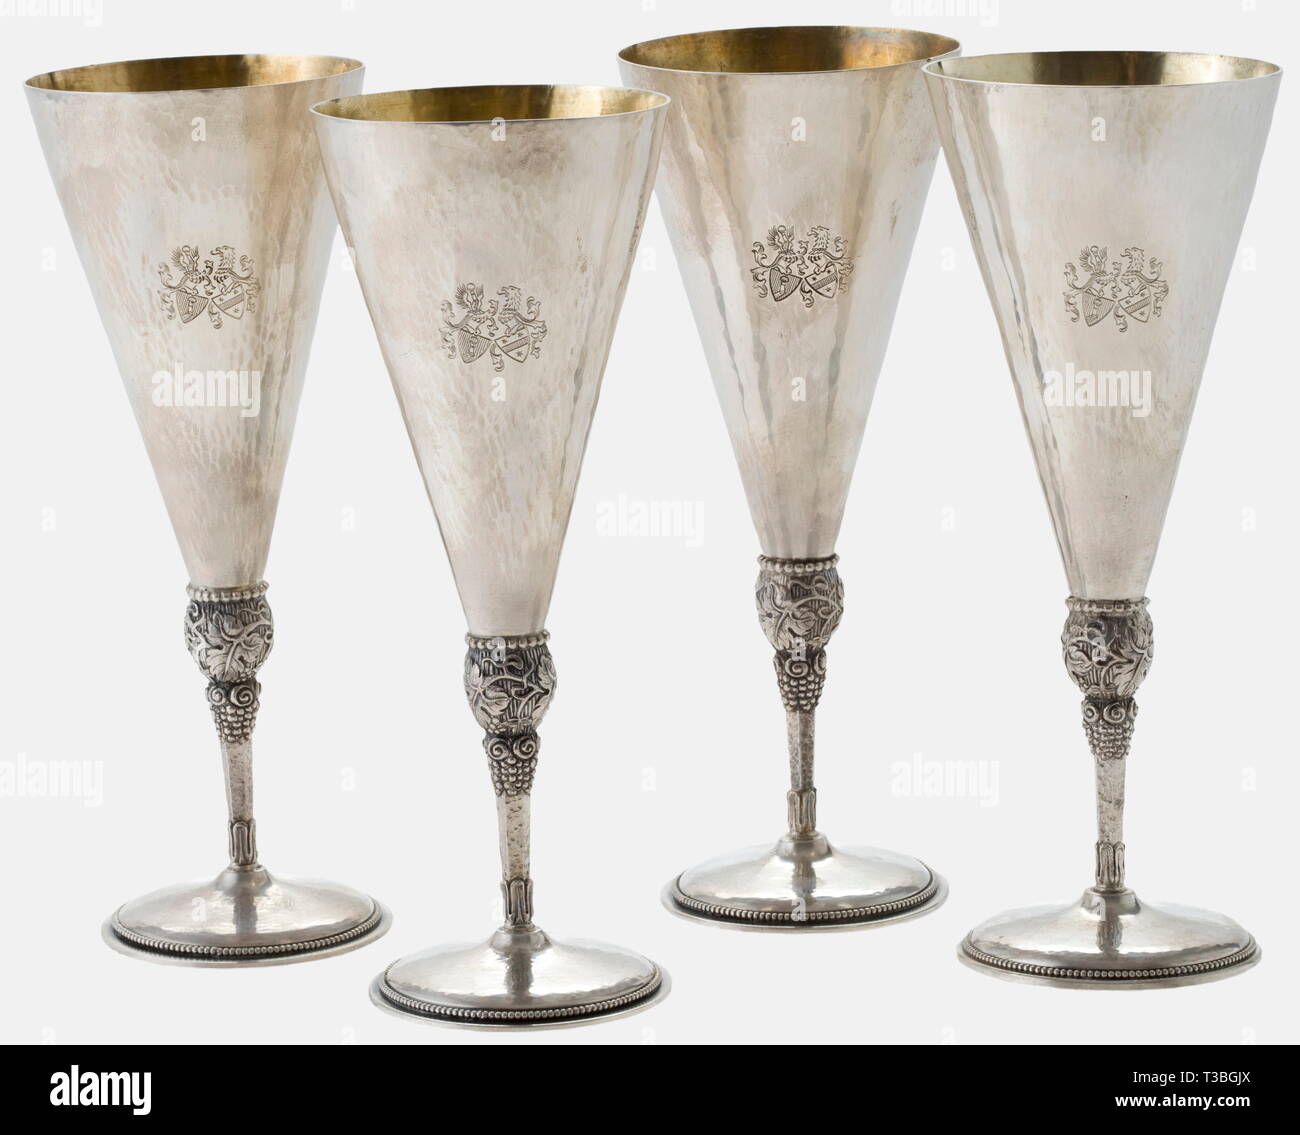 Hermann Göring and Emmy Sonnemann, four silver goblets, wedding gifts for the couple 1935 Hand-hammered silver, gilt interior, the obverse engraved with a alliance coat of arms. The stems with grape and vine leaf decoration in relief, the circular foot with the master's mark "Kleemann" and hallmark "925". Height of each goblet 18 cm, weight between 172 and 178 g. historic, historical, 1930s, 20th century, NS, National Socialism, Nazism, Third Reich, German Reich, Germany, German, National Socialist, Nazi, Nazi period, fascism, vessel, vessels, object, objects, stills, clipp, Editorial-Use-Only Stock Photo